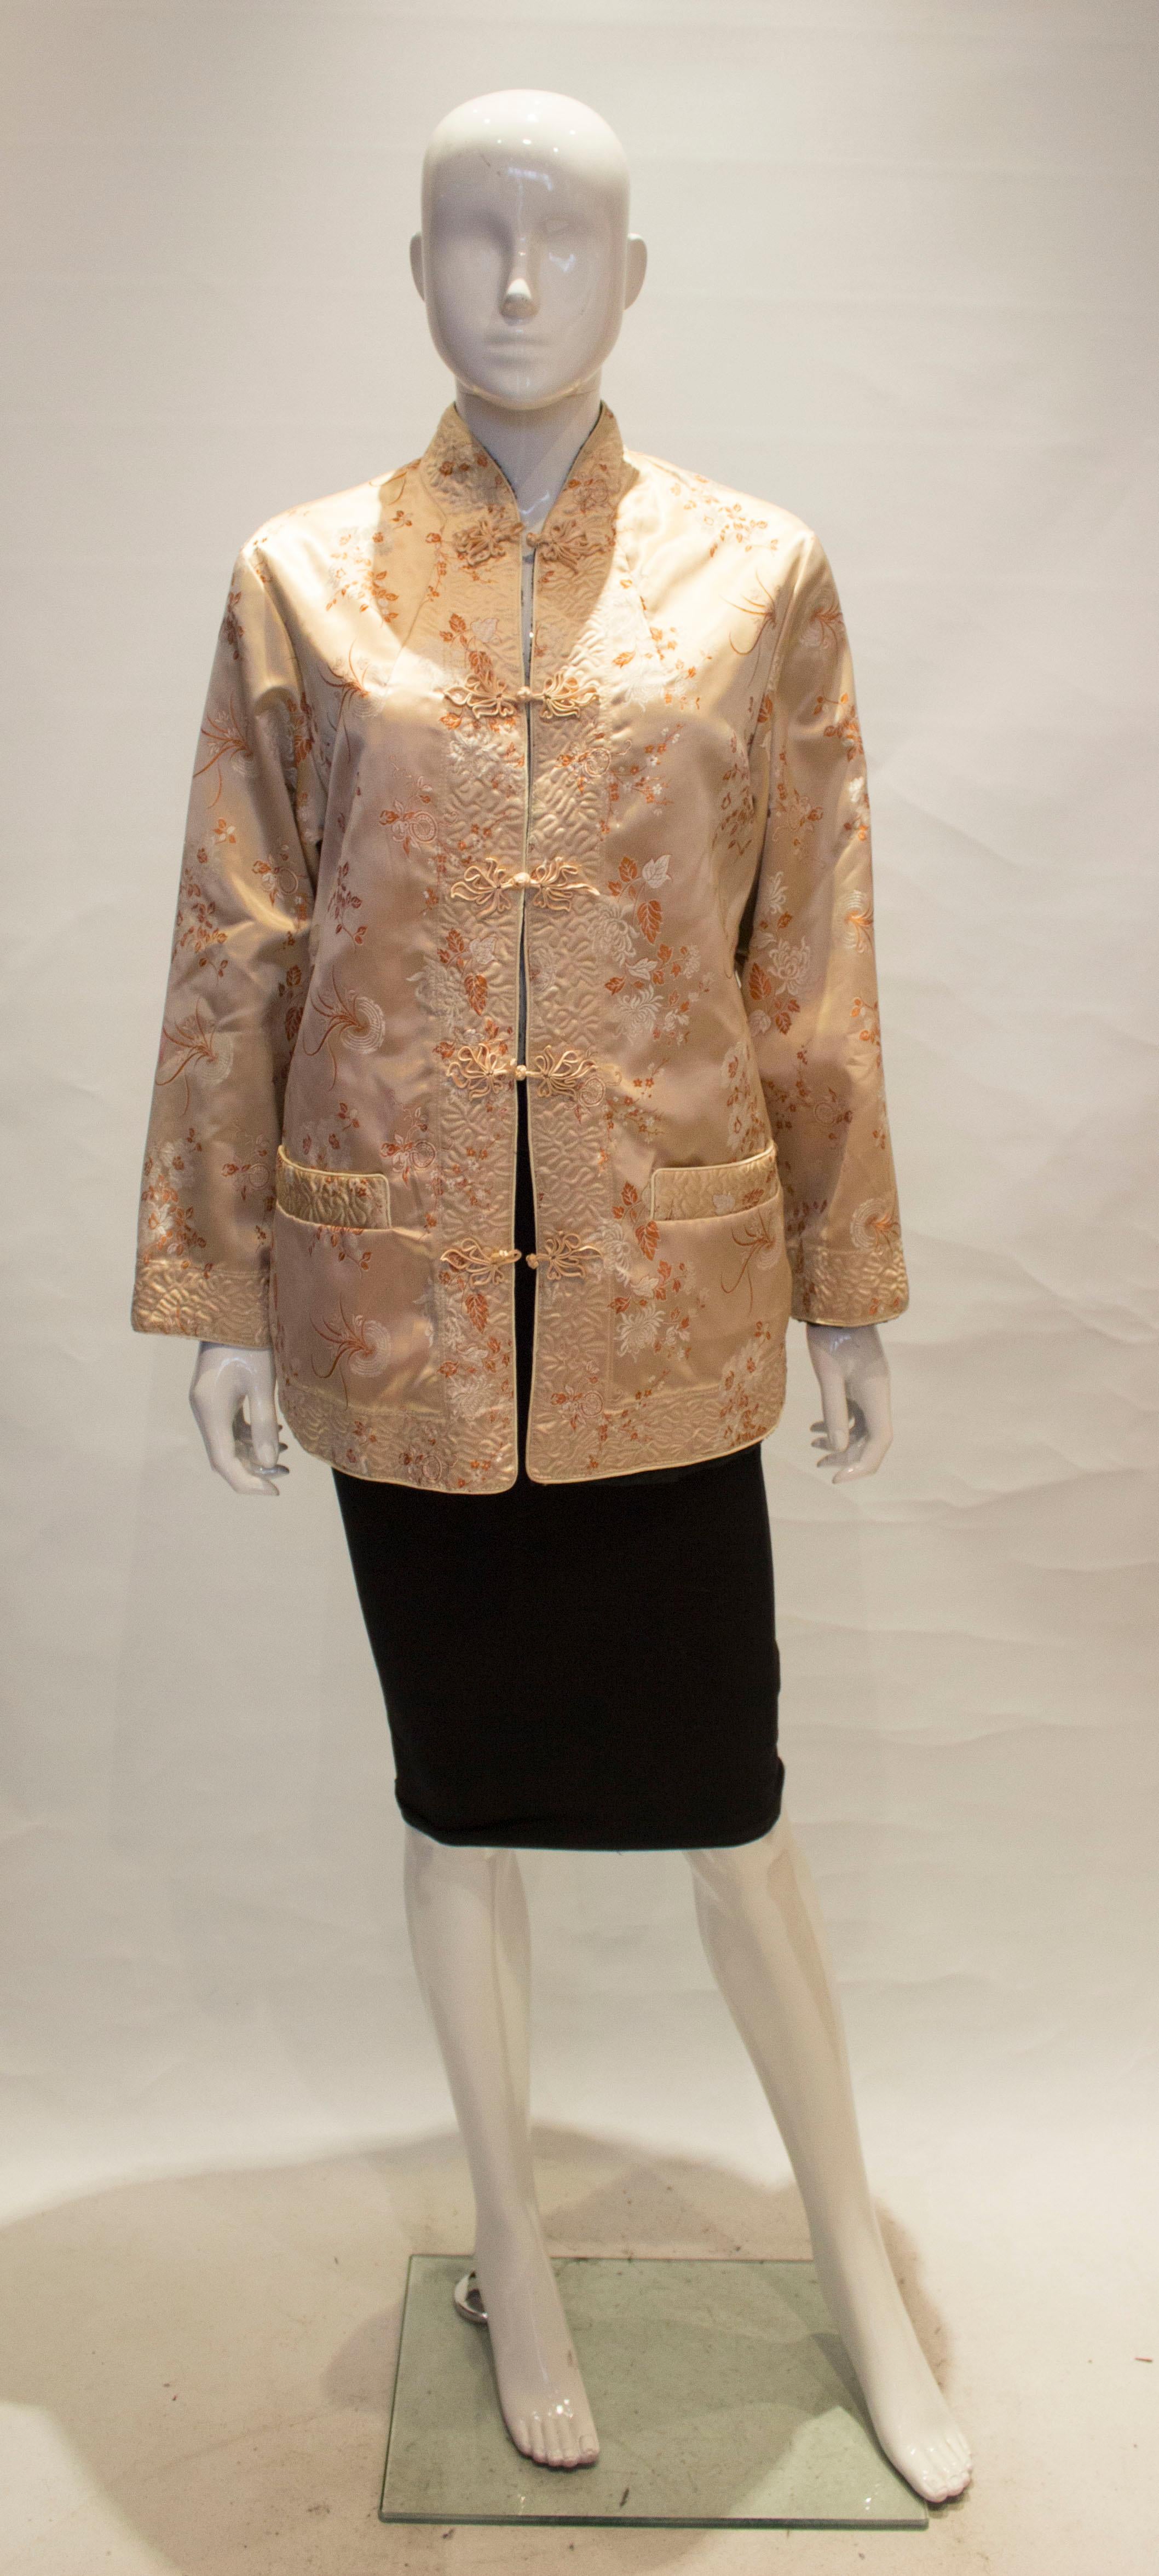 A pretty vintage Chinease jacket in a soft gold colour with orange detail and black fur lining.
The jacket has a stand up collar , pockets on wither side and a 5'' slit on either side.